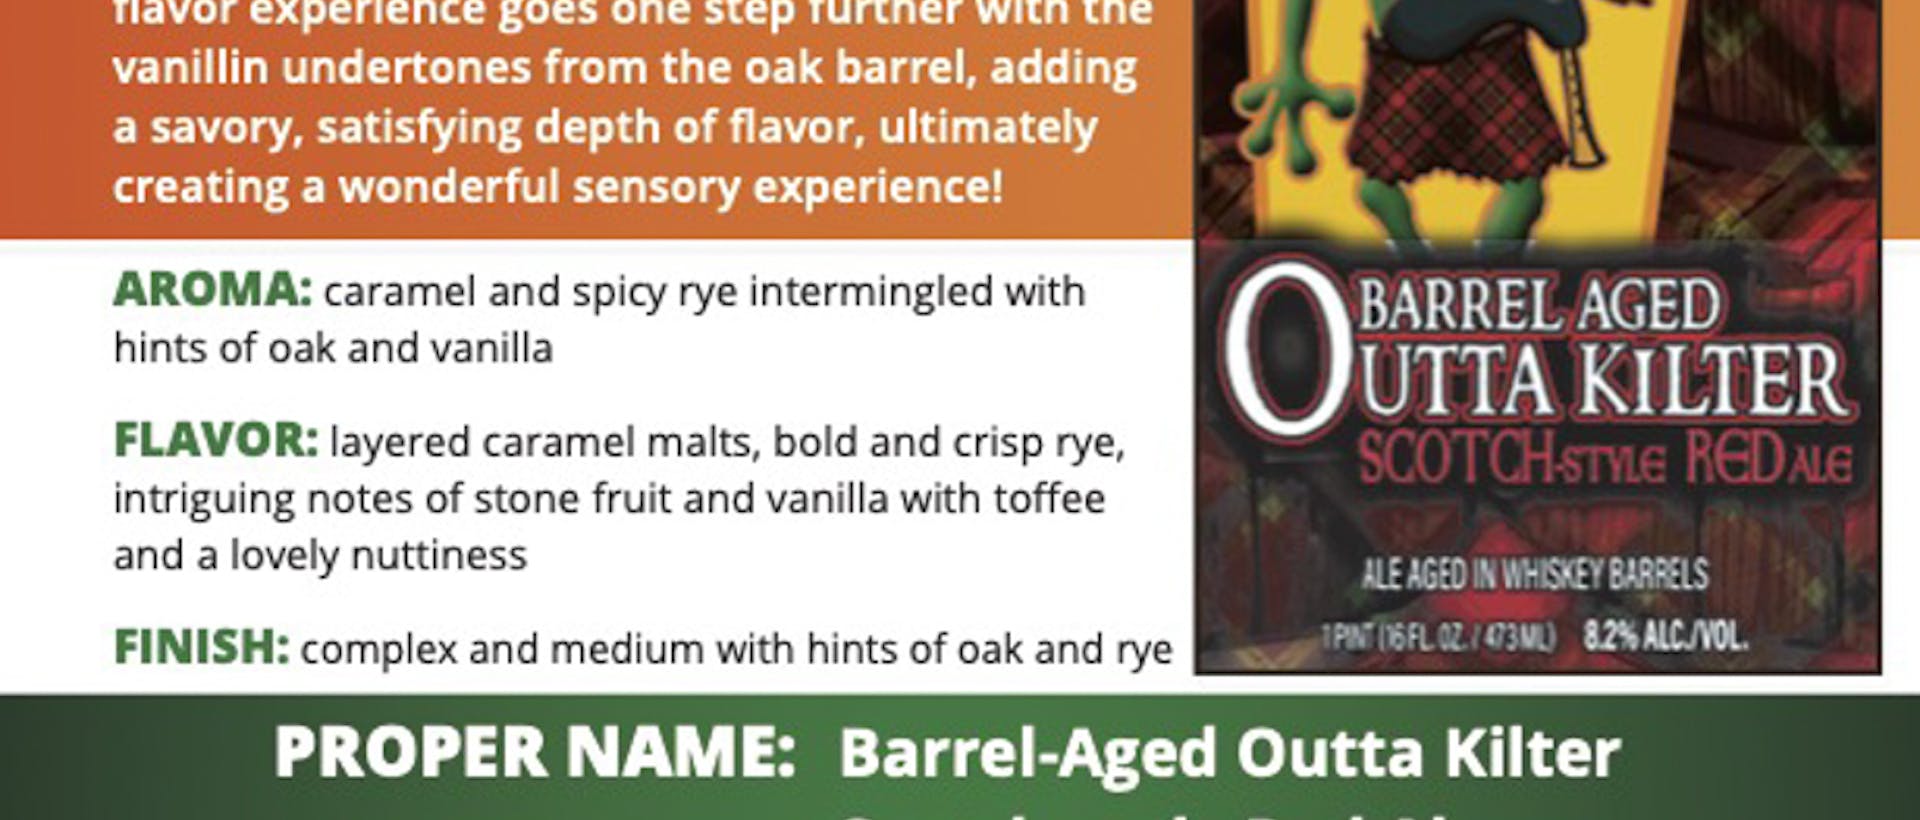 HF_Sell Sheet - Barrel-Aged Series - Barrel-Aged Outta Kilter Wee Heavy Scotch-style Red Ale (updated 02-15-22)